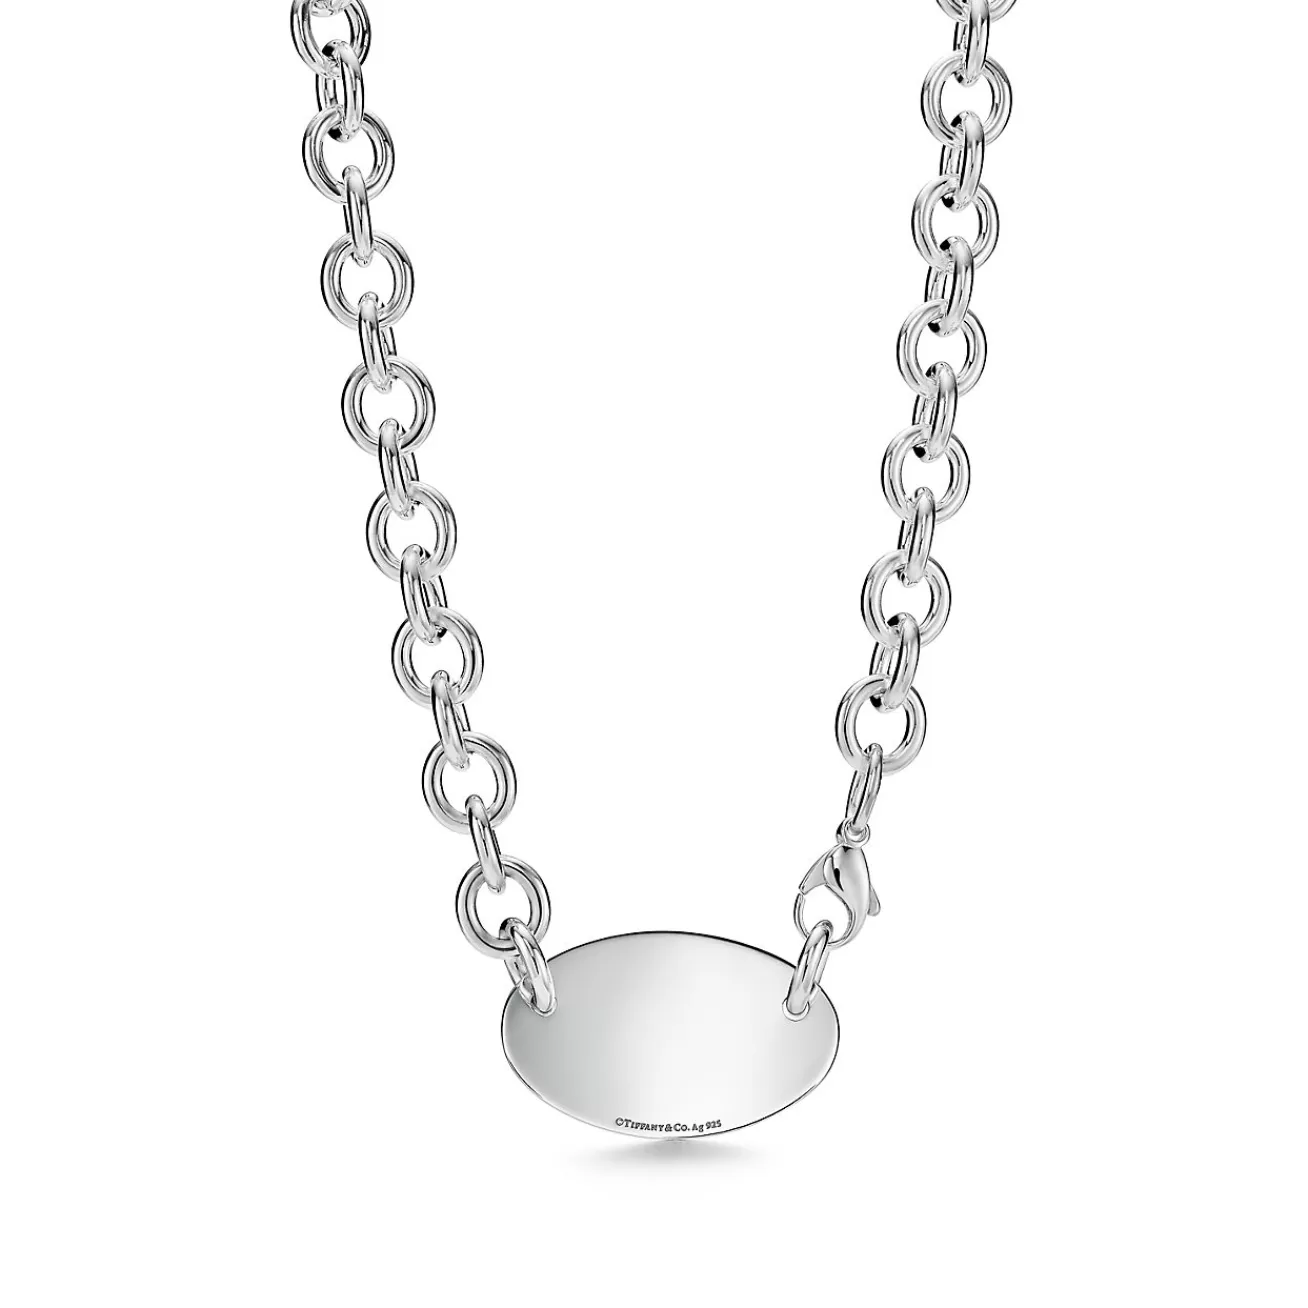 Tiffany & Co. Return to Tiffany® oval tag necklace in sterling silver, 15.5". | ^ Necklaces & Pendants | Bold Silver Jewelry